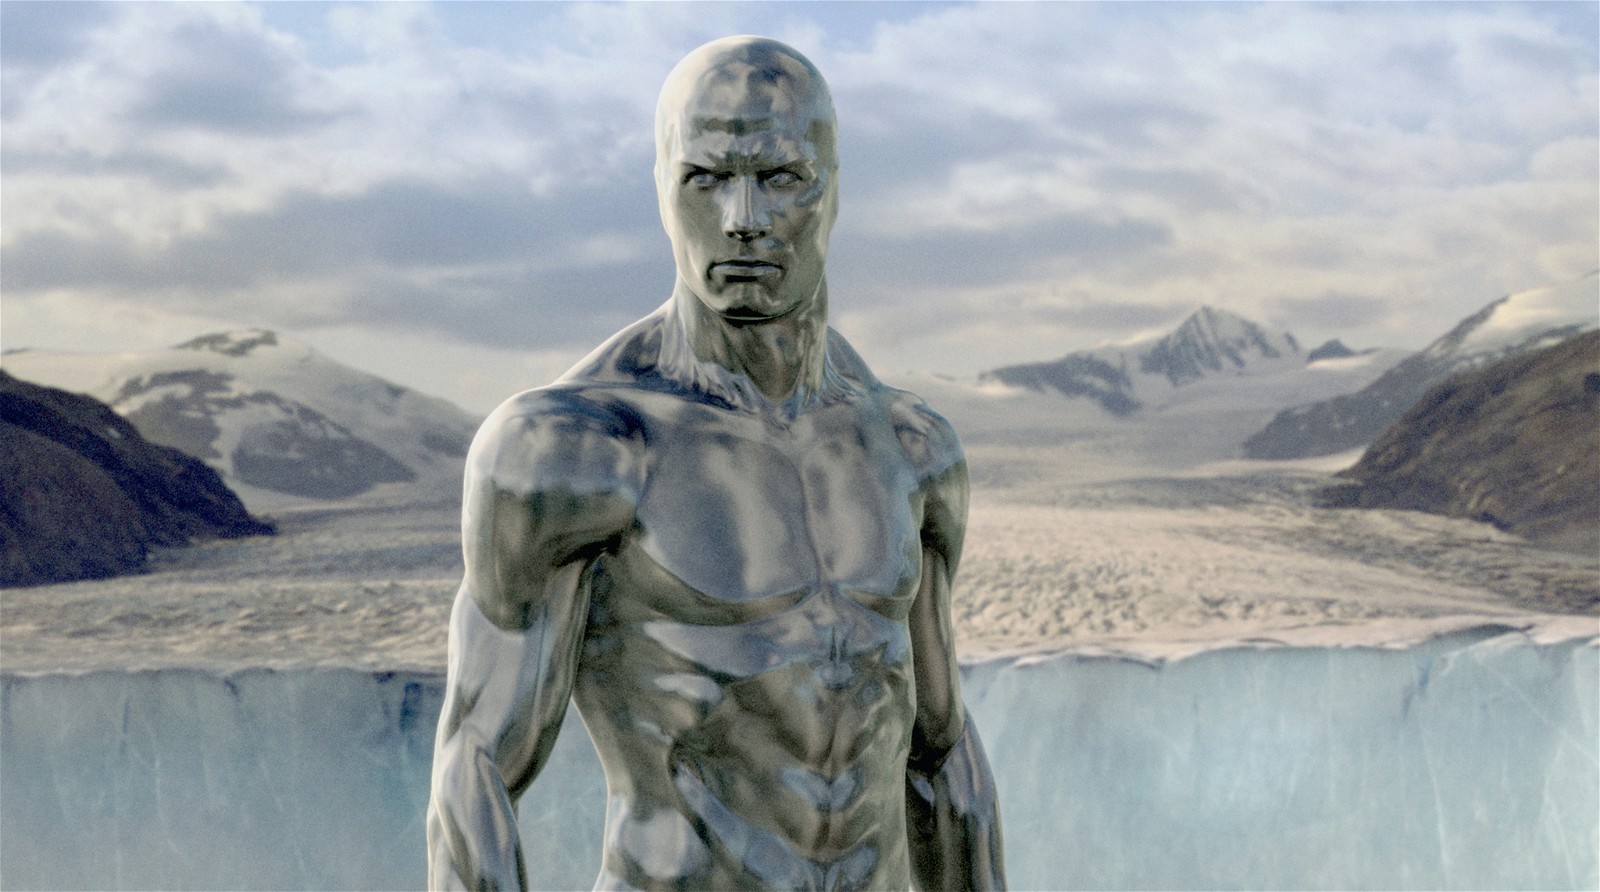 The Silver Surfer, as depicted in Fantastic Four: Rise of the Silver Surfer